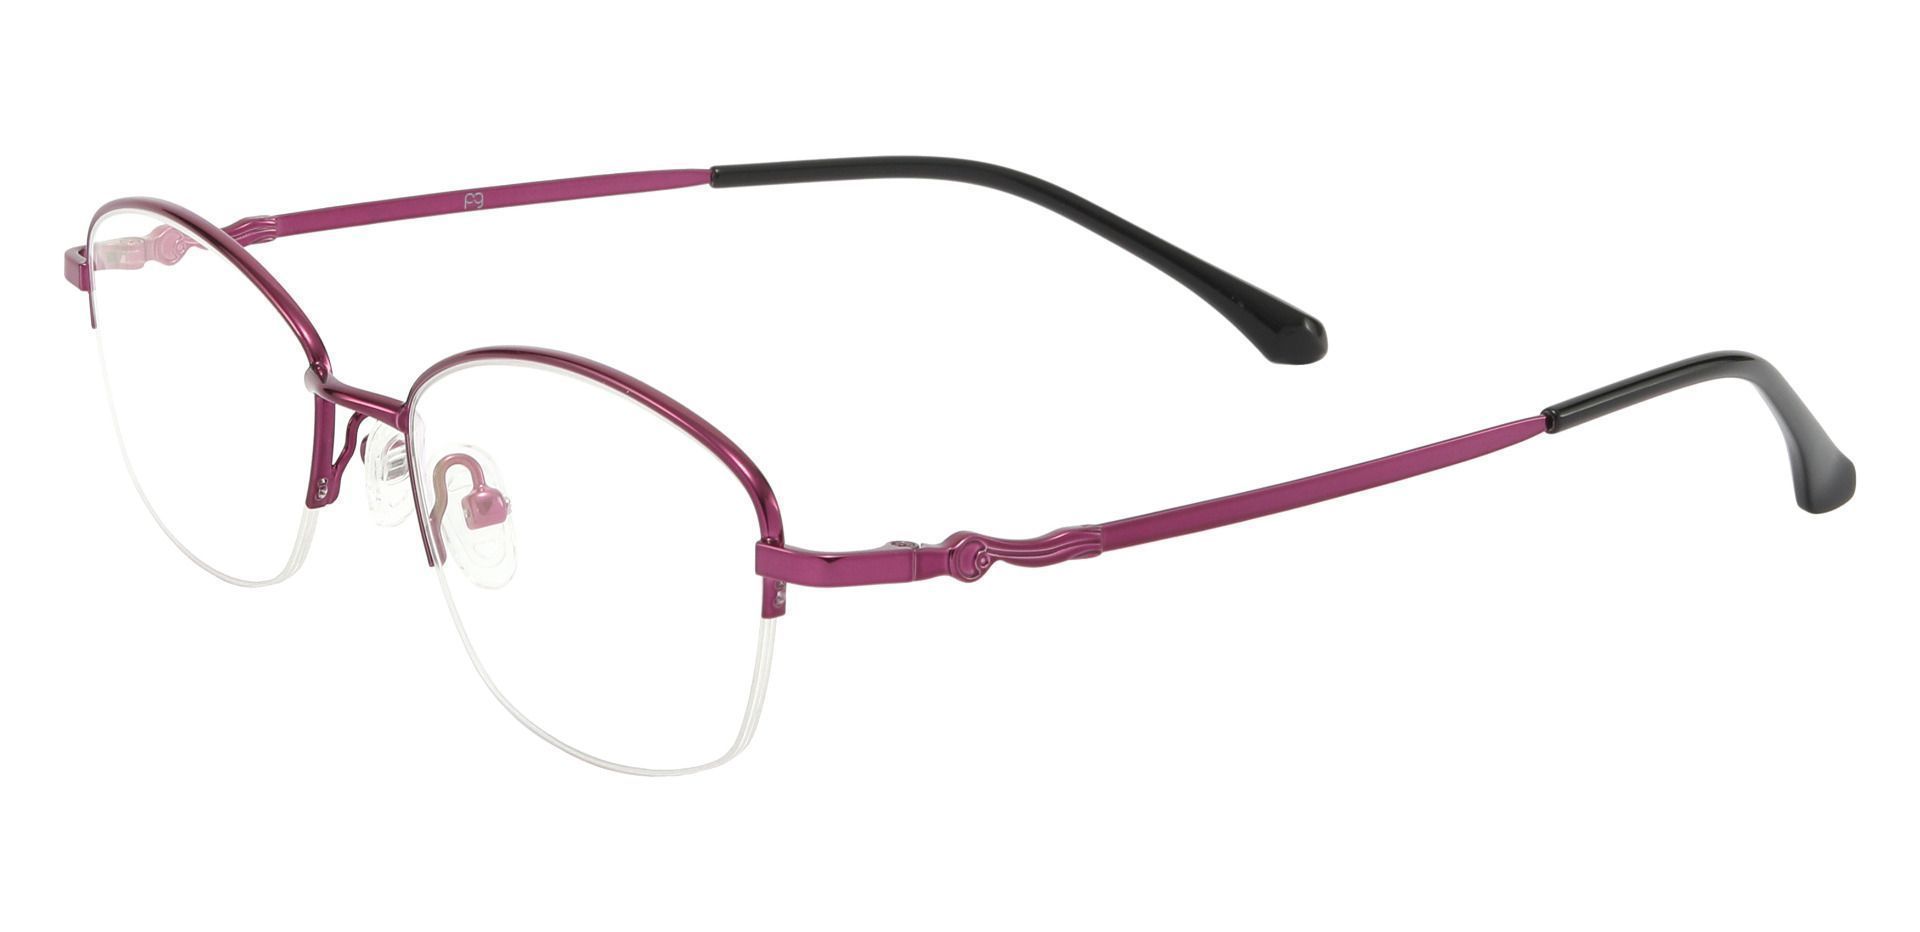 Beulah Oval Reading Glasses - Purple